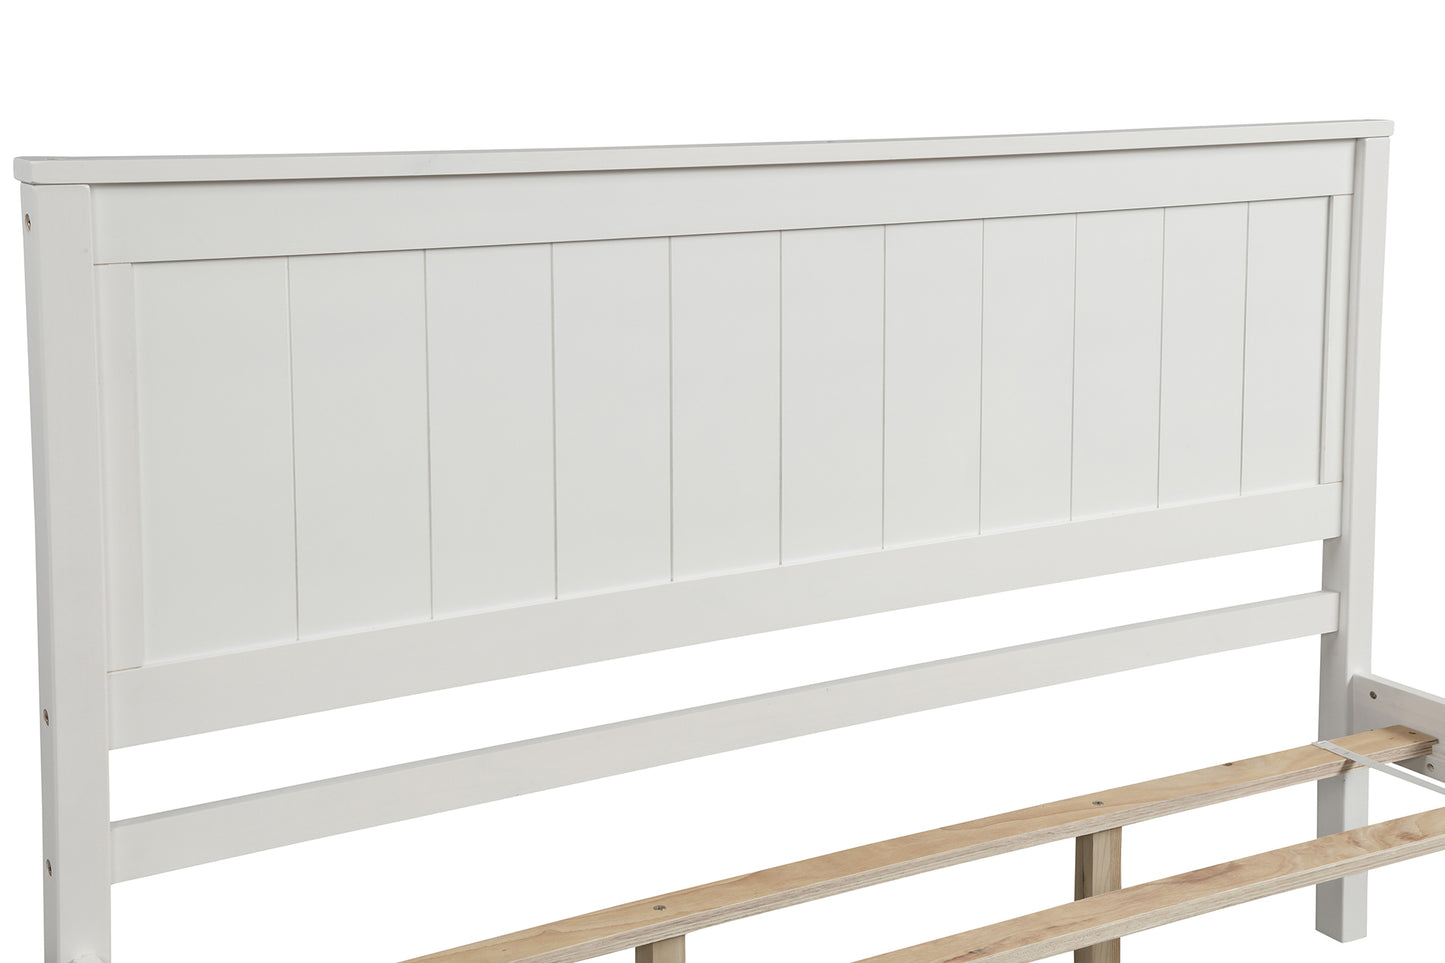 Platform Bed Frame with Headboard , Wood Slat Support , No Box Spring Needed ,Queen,White(OLD SKU:WF191420AAK)